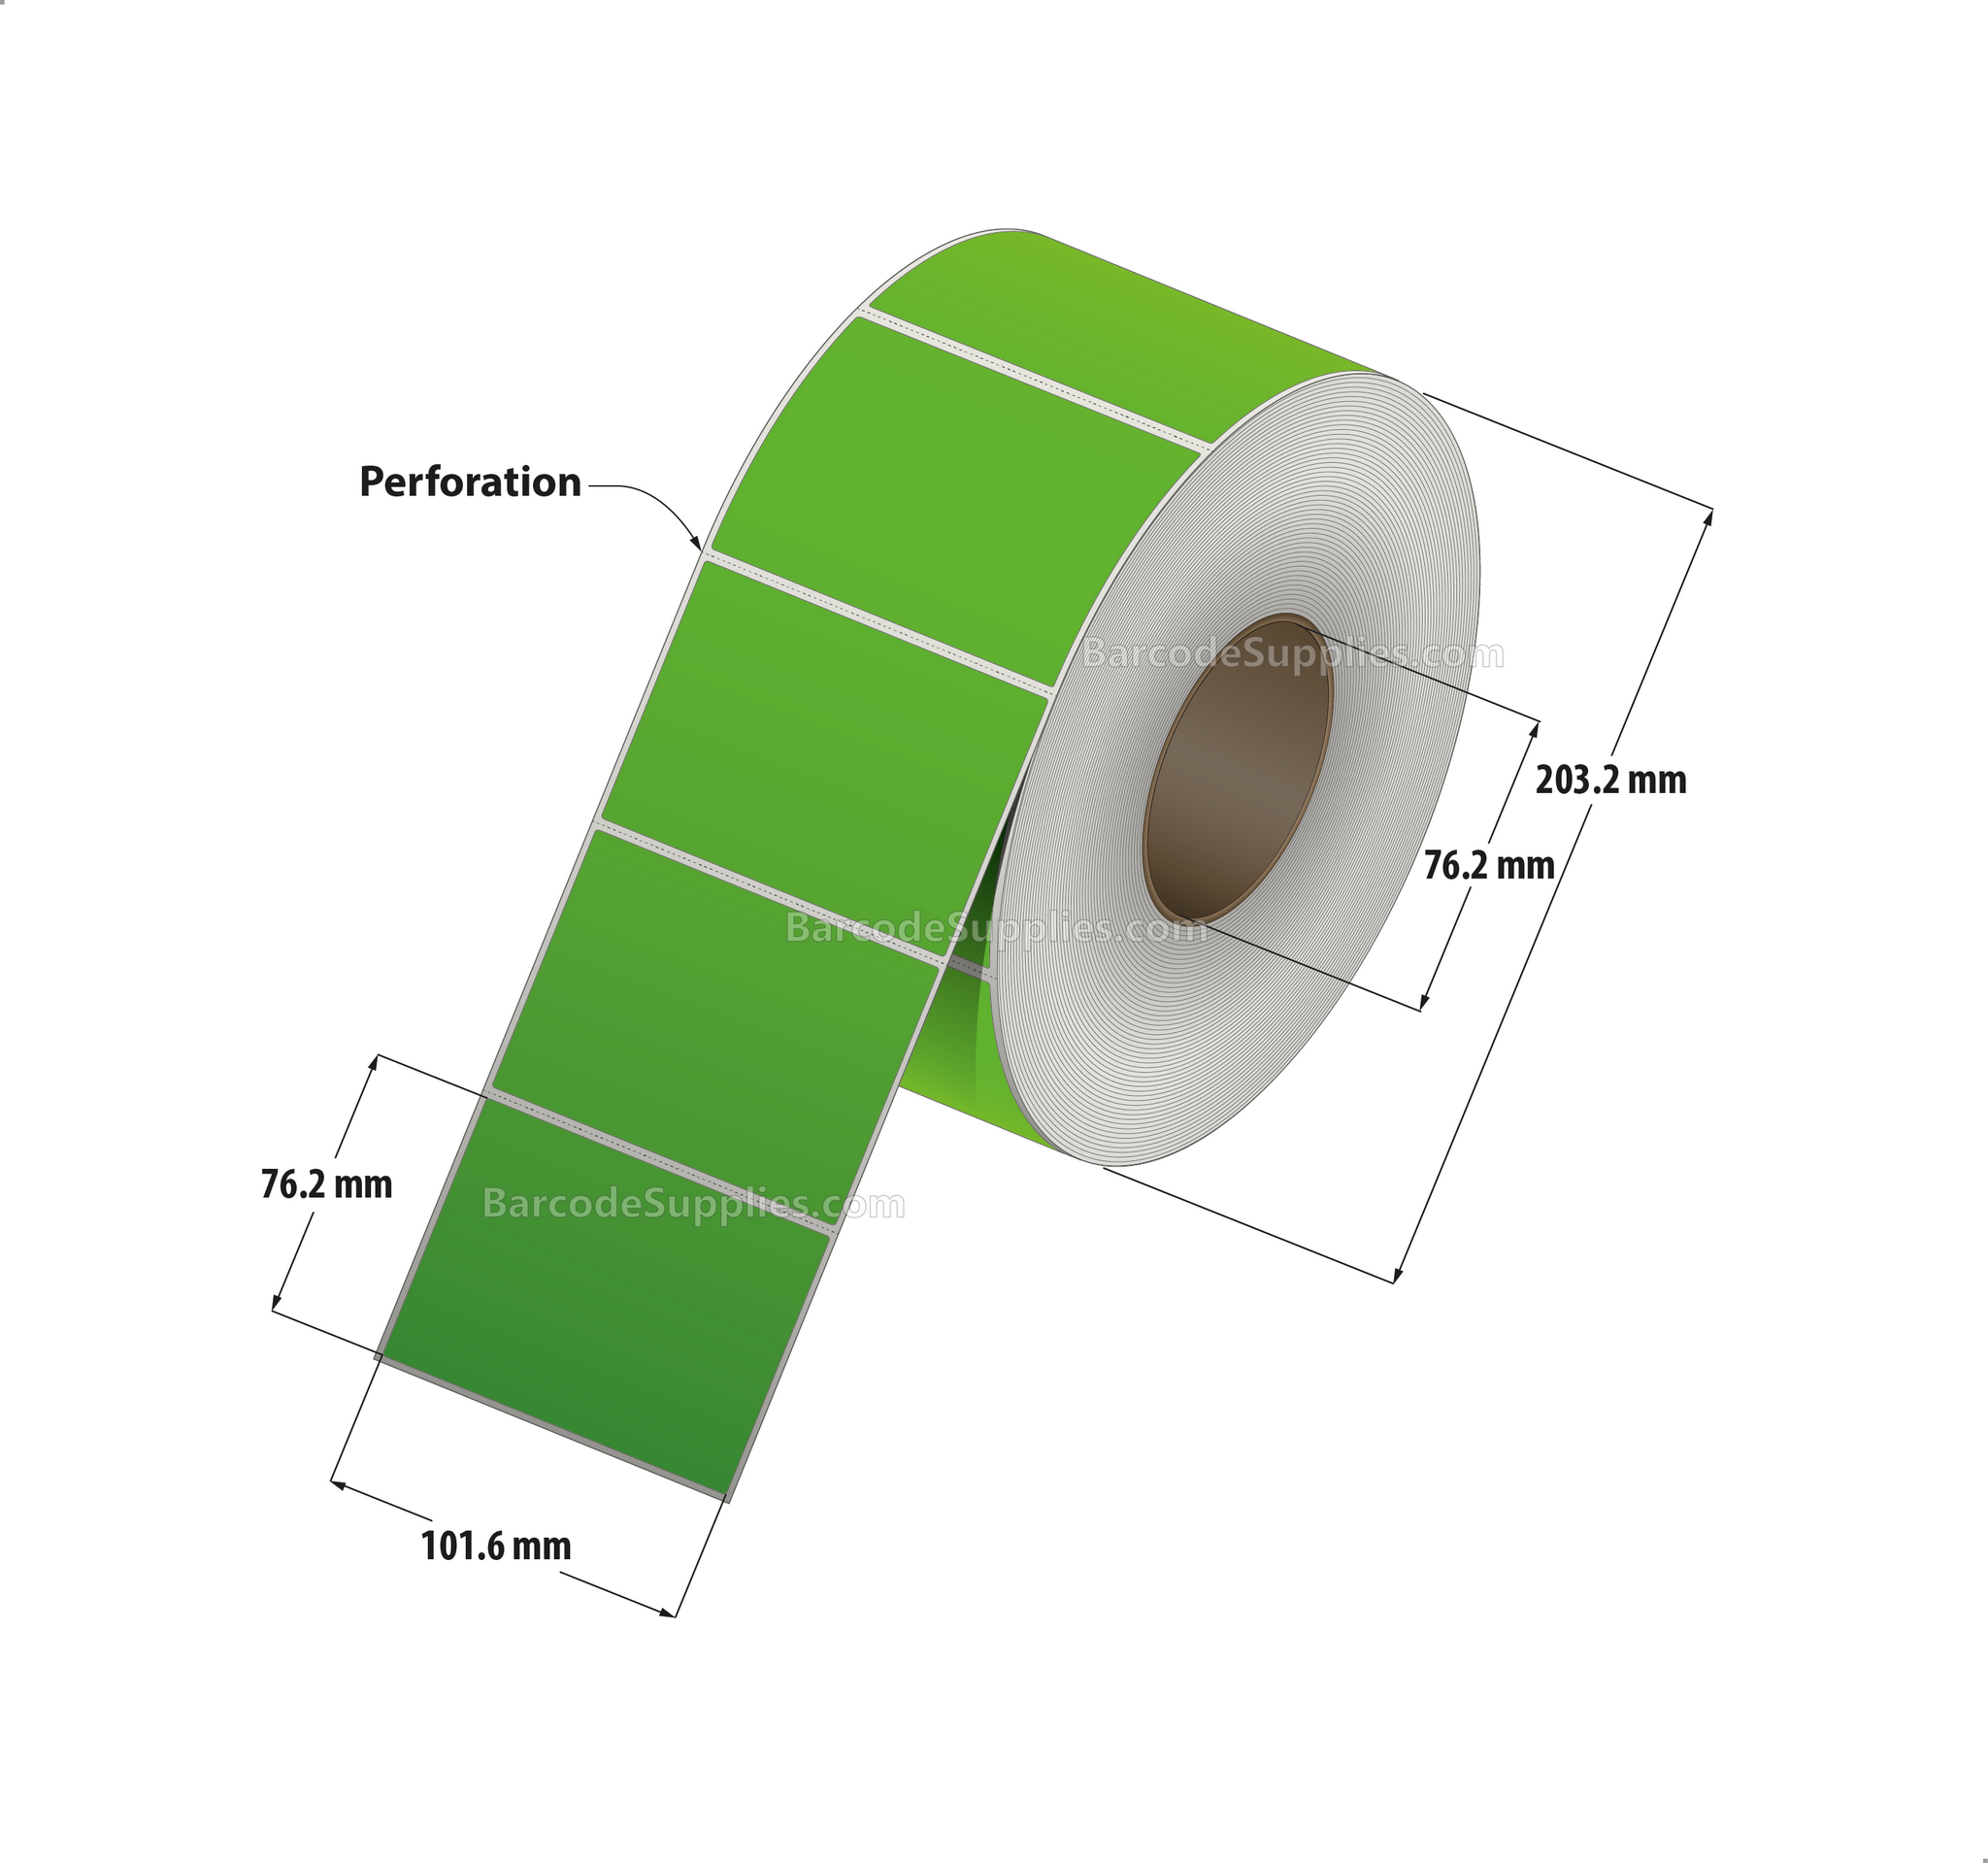 Products 4 x 4 Thermal Transfer Fluorescent Green Labels With Permanent Acrylic Adhesive - Perforated - 1500 Labels Per Roll - Carton Of 4 Rolls - 6000 Labels Total - MPN: TH44-1PFG